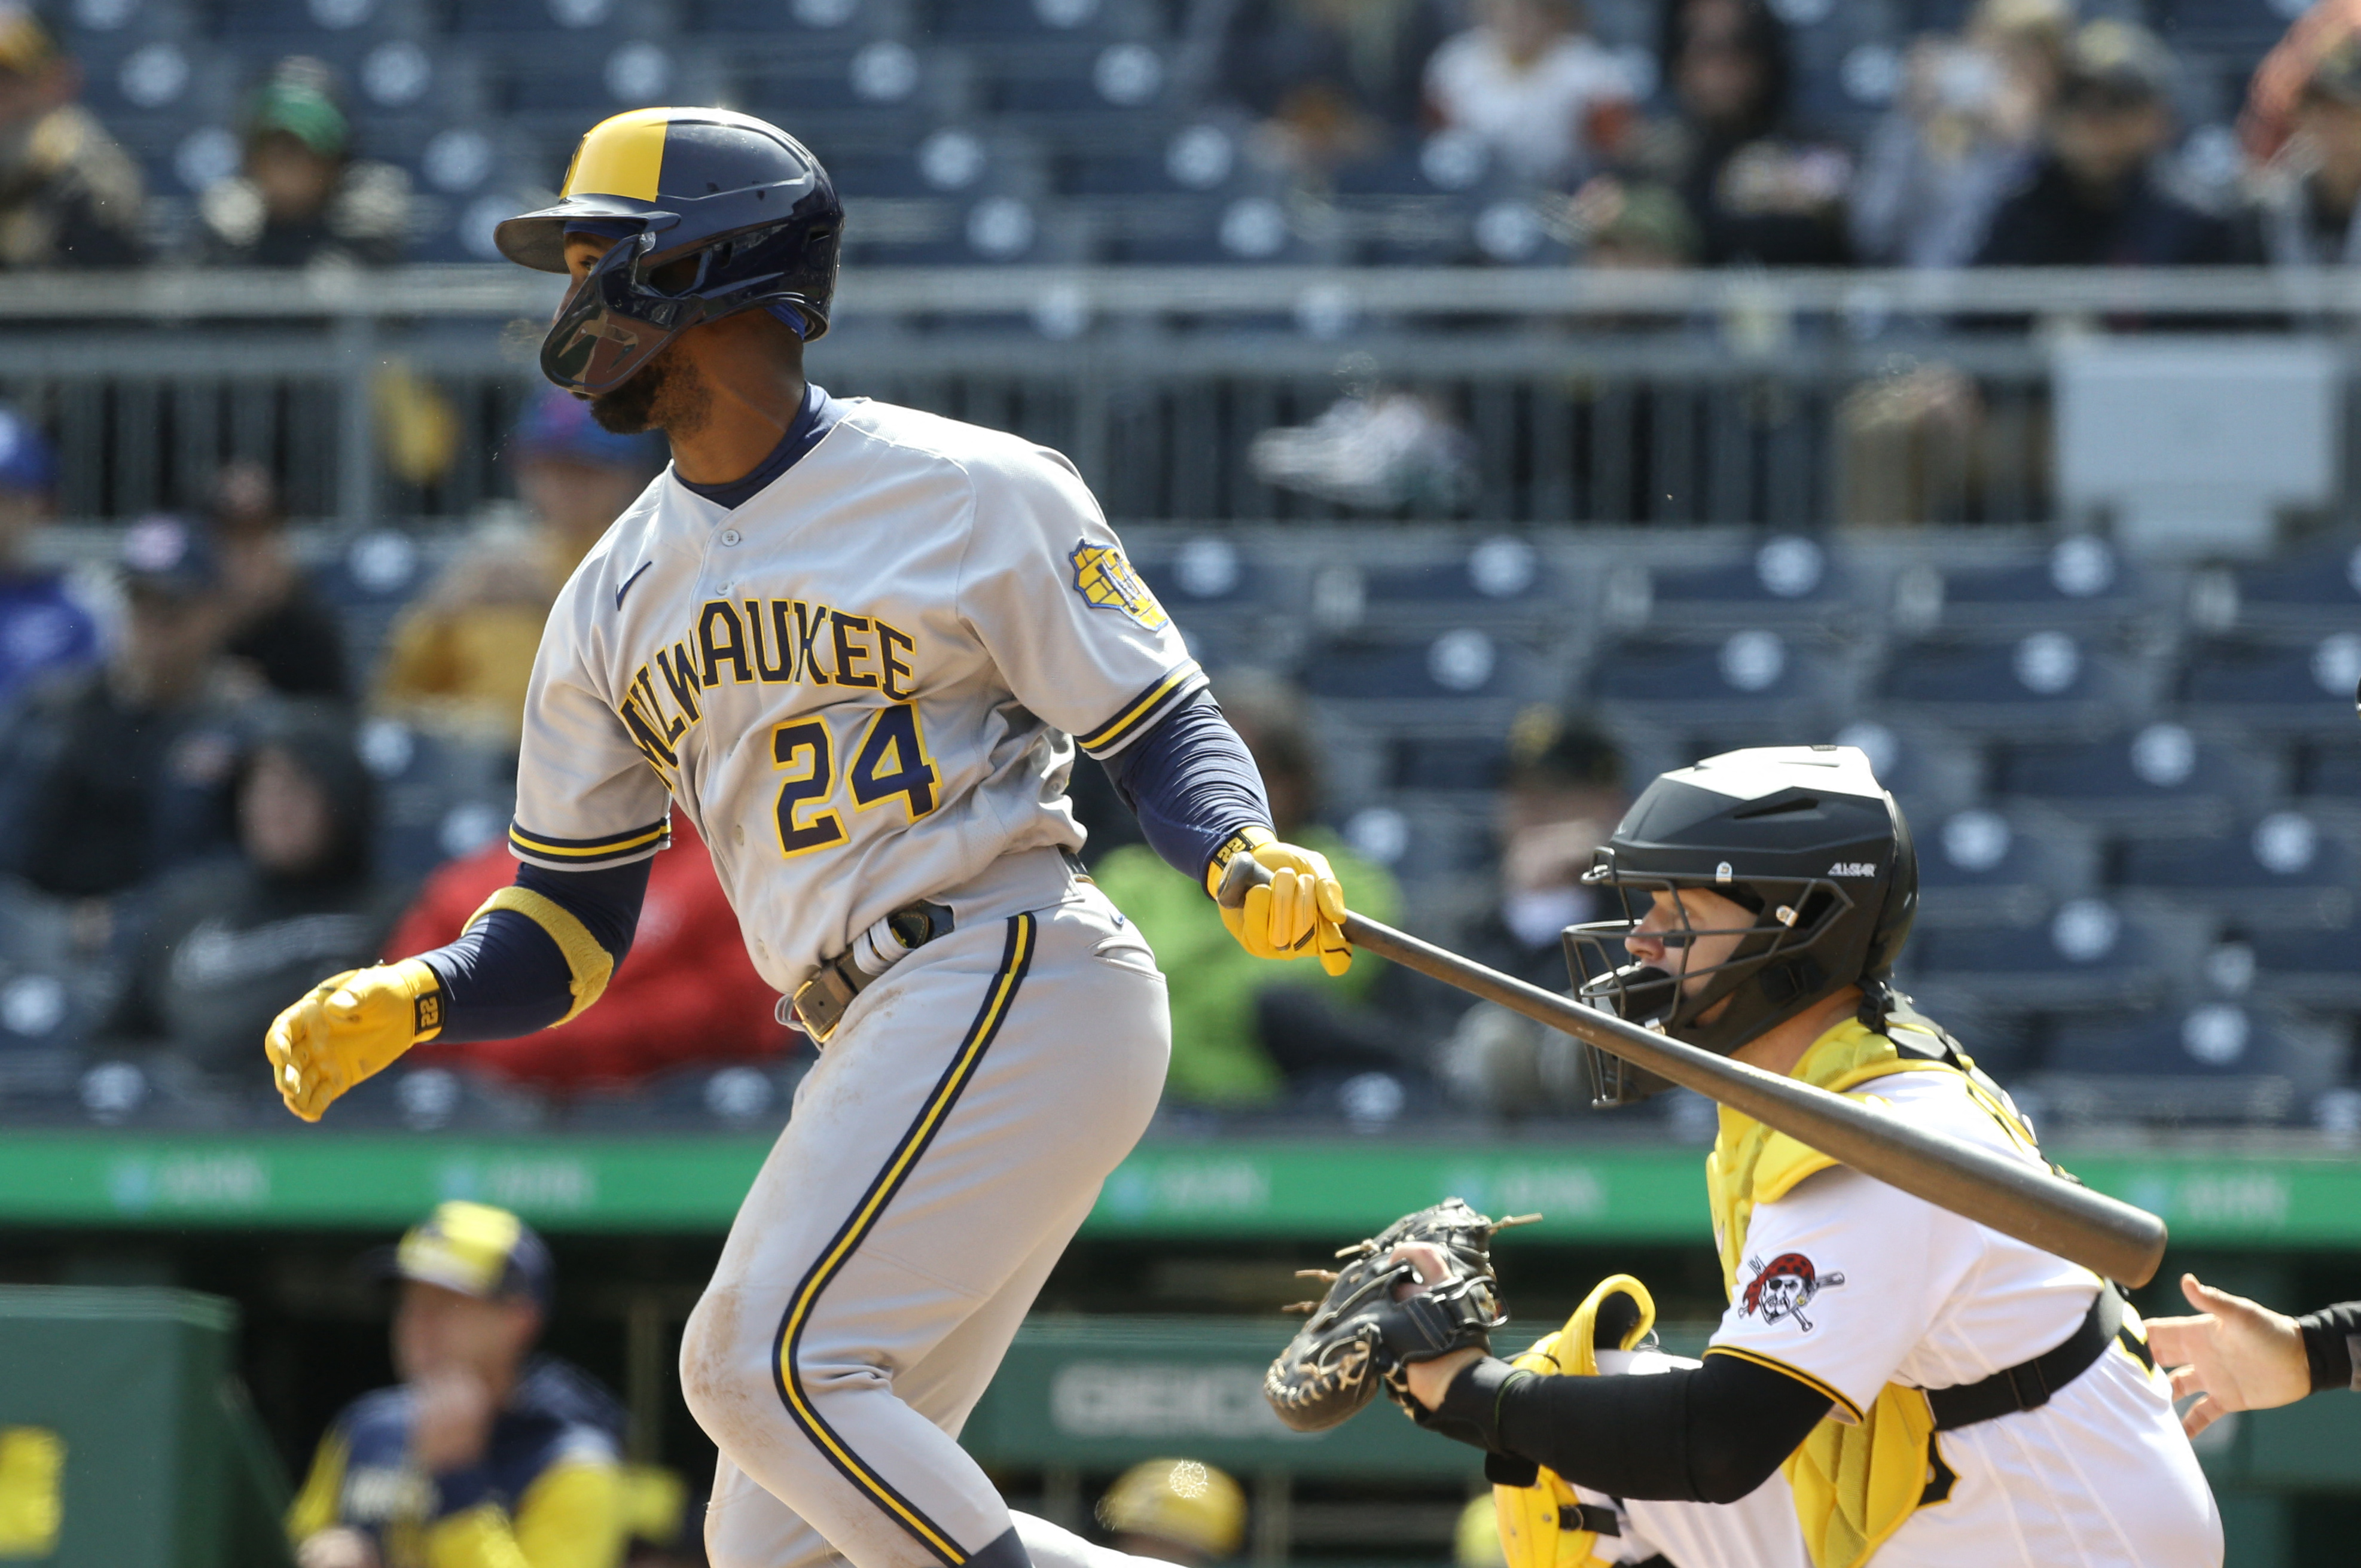 Andrew McCutchen delivers a base hit against his former team, the Pittsburgh Pirates.